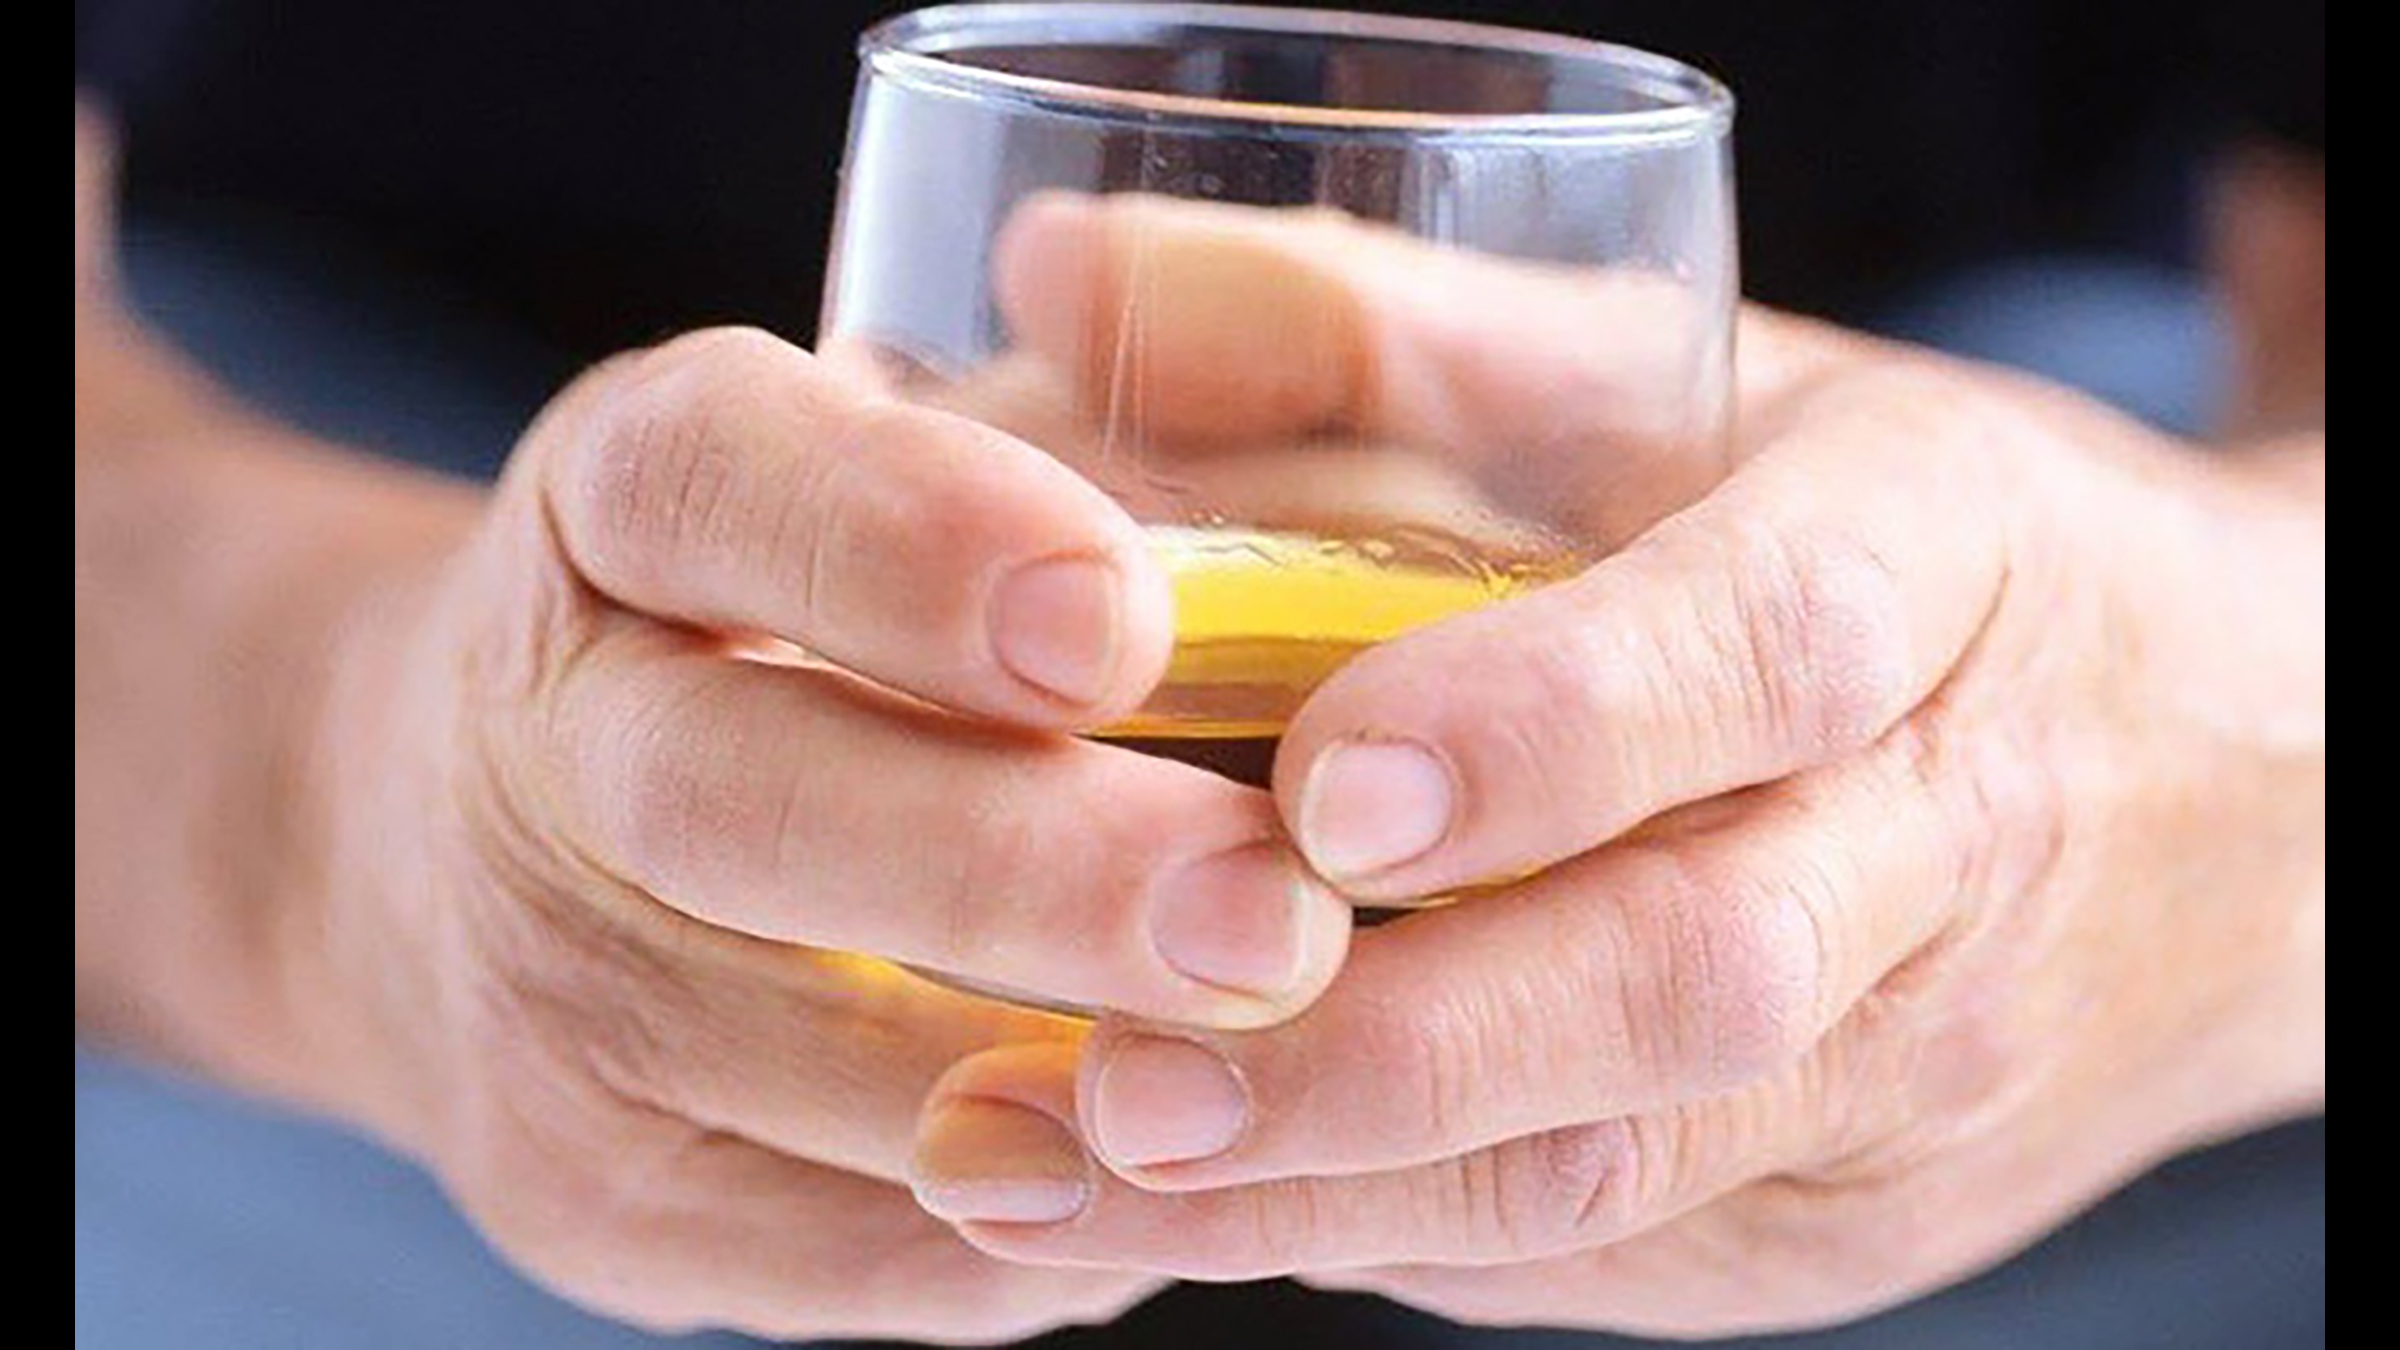 A pair of hands holding a glass of semi-clear yellowish liquid